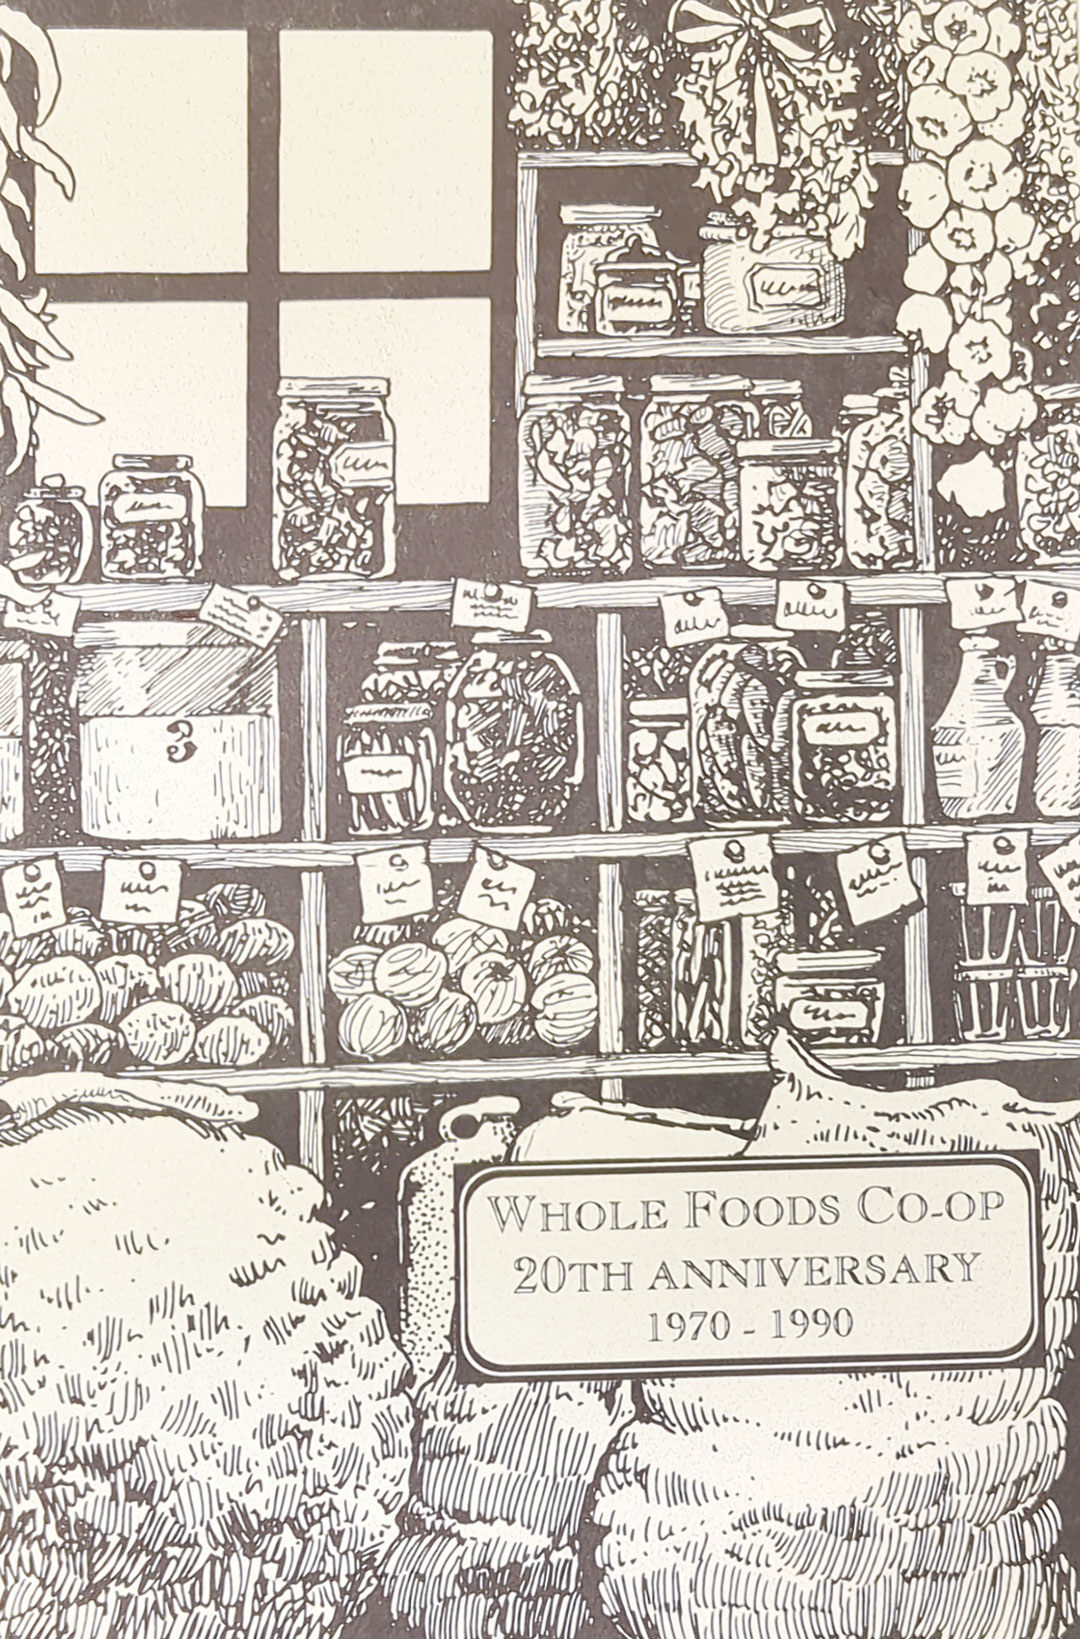 Black-and-white illustration of a grocery store with shelves filled with jars, baskets of produce, and potted plants. A sign at the bottom reads, "Whole Foods Coop Duluth MN 20th Anniversary 1970-1990.